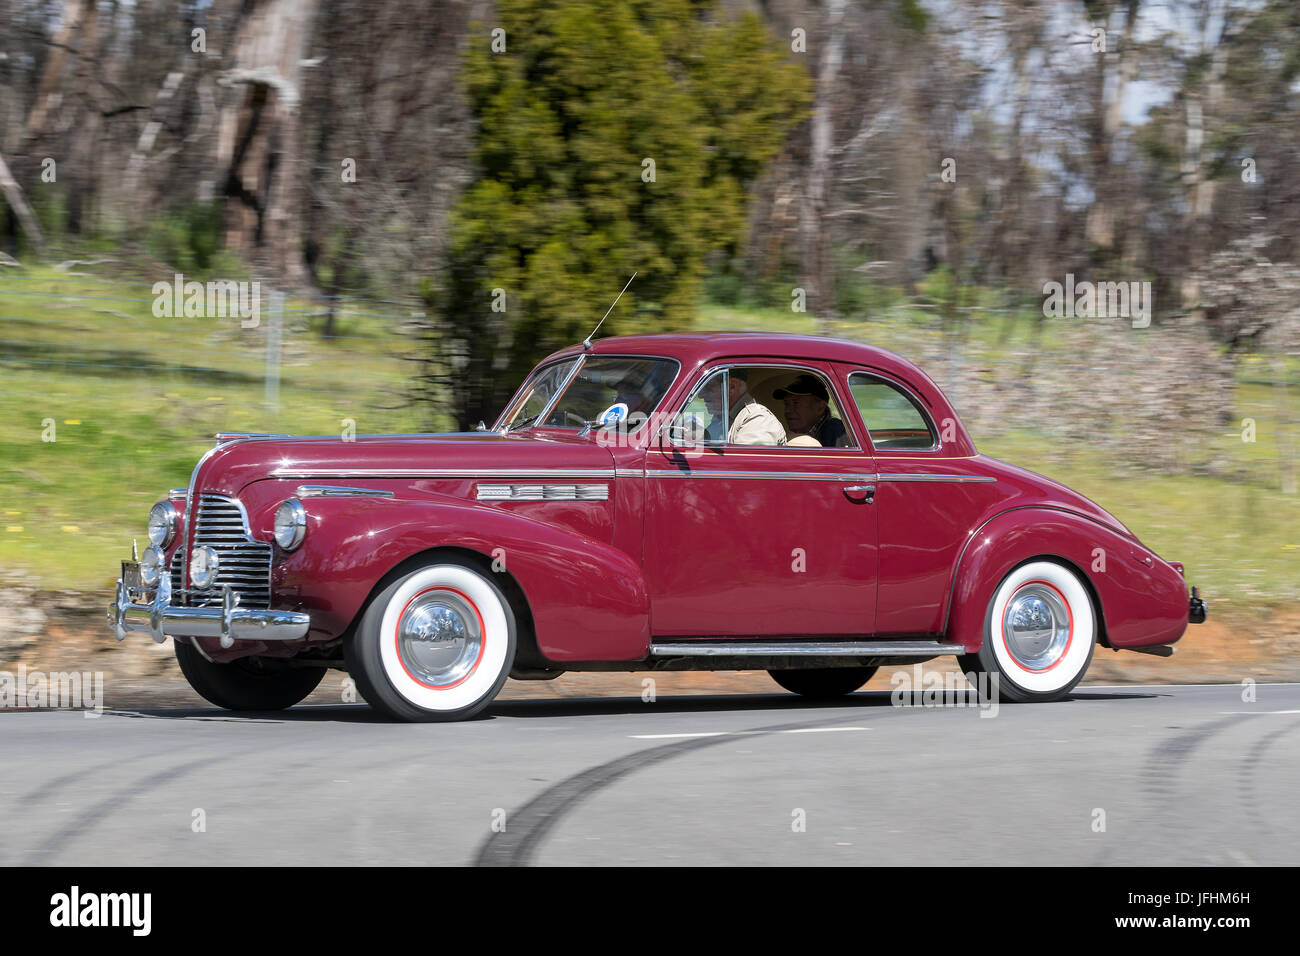 Vintage 1940 Buick Special Coupe driving on country roads near the town of Birdwood, South Australia. Stock Photo